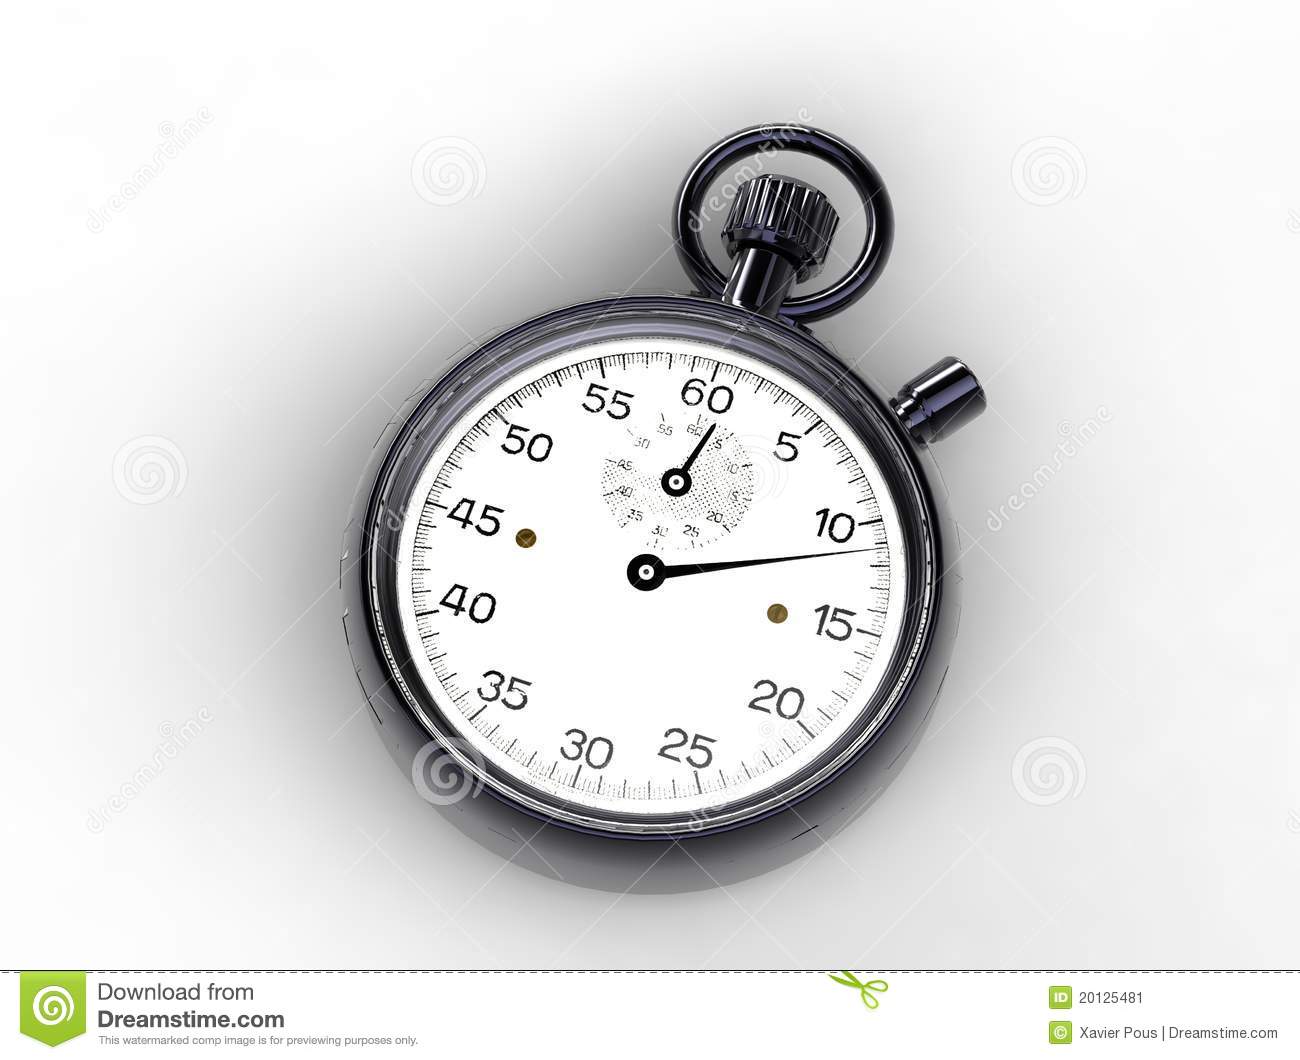 Old Stopwatch Stock Image   Image  20125481